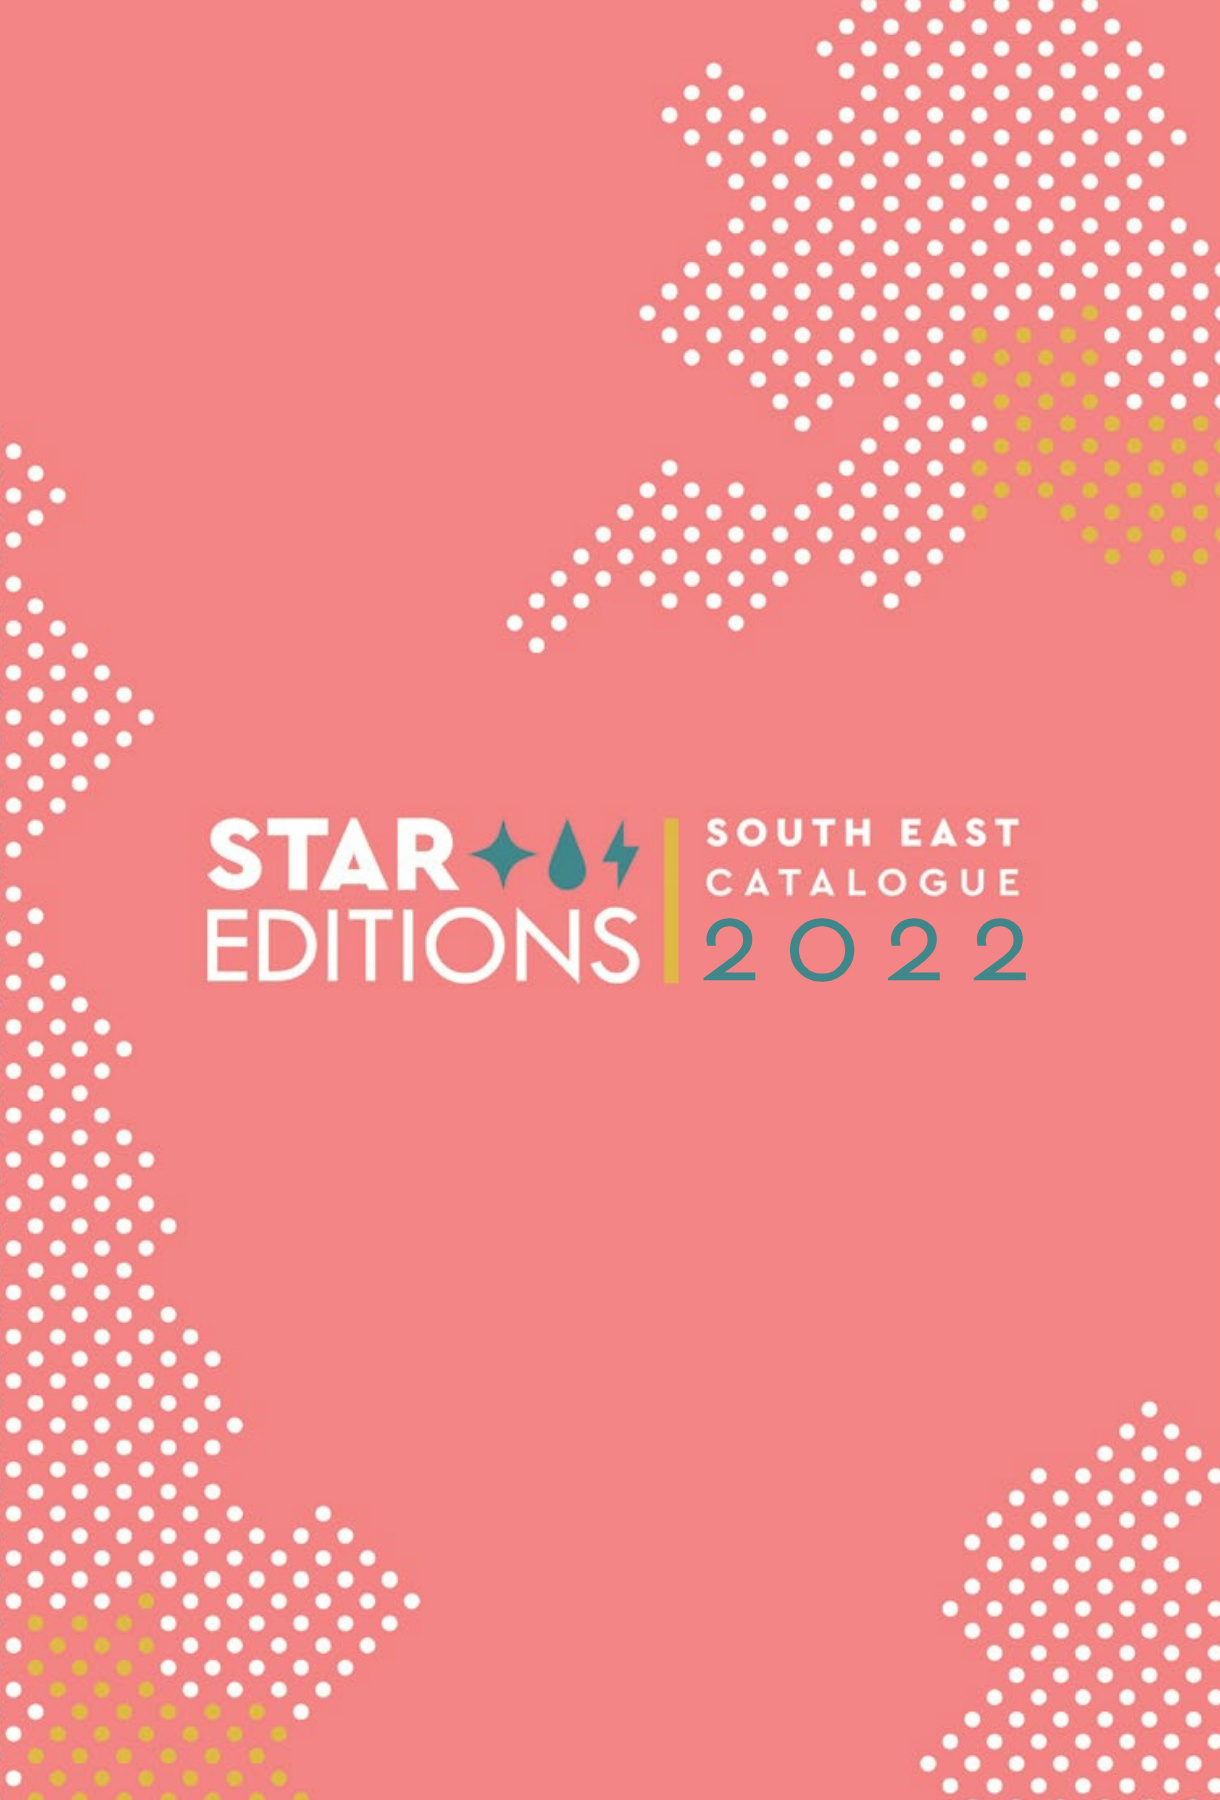 Star Editions South East Product Catalogue